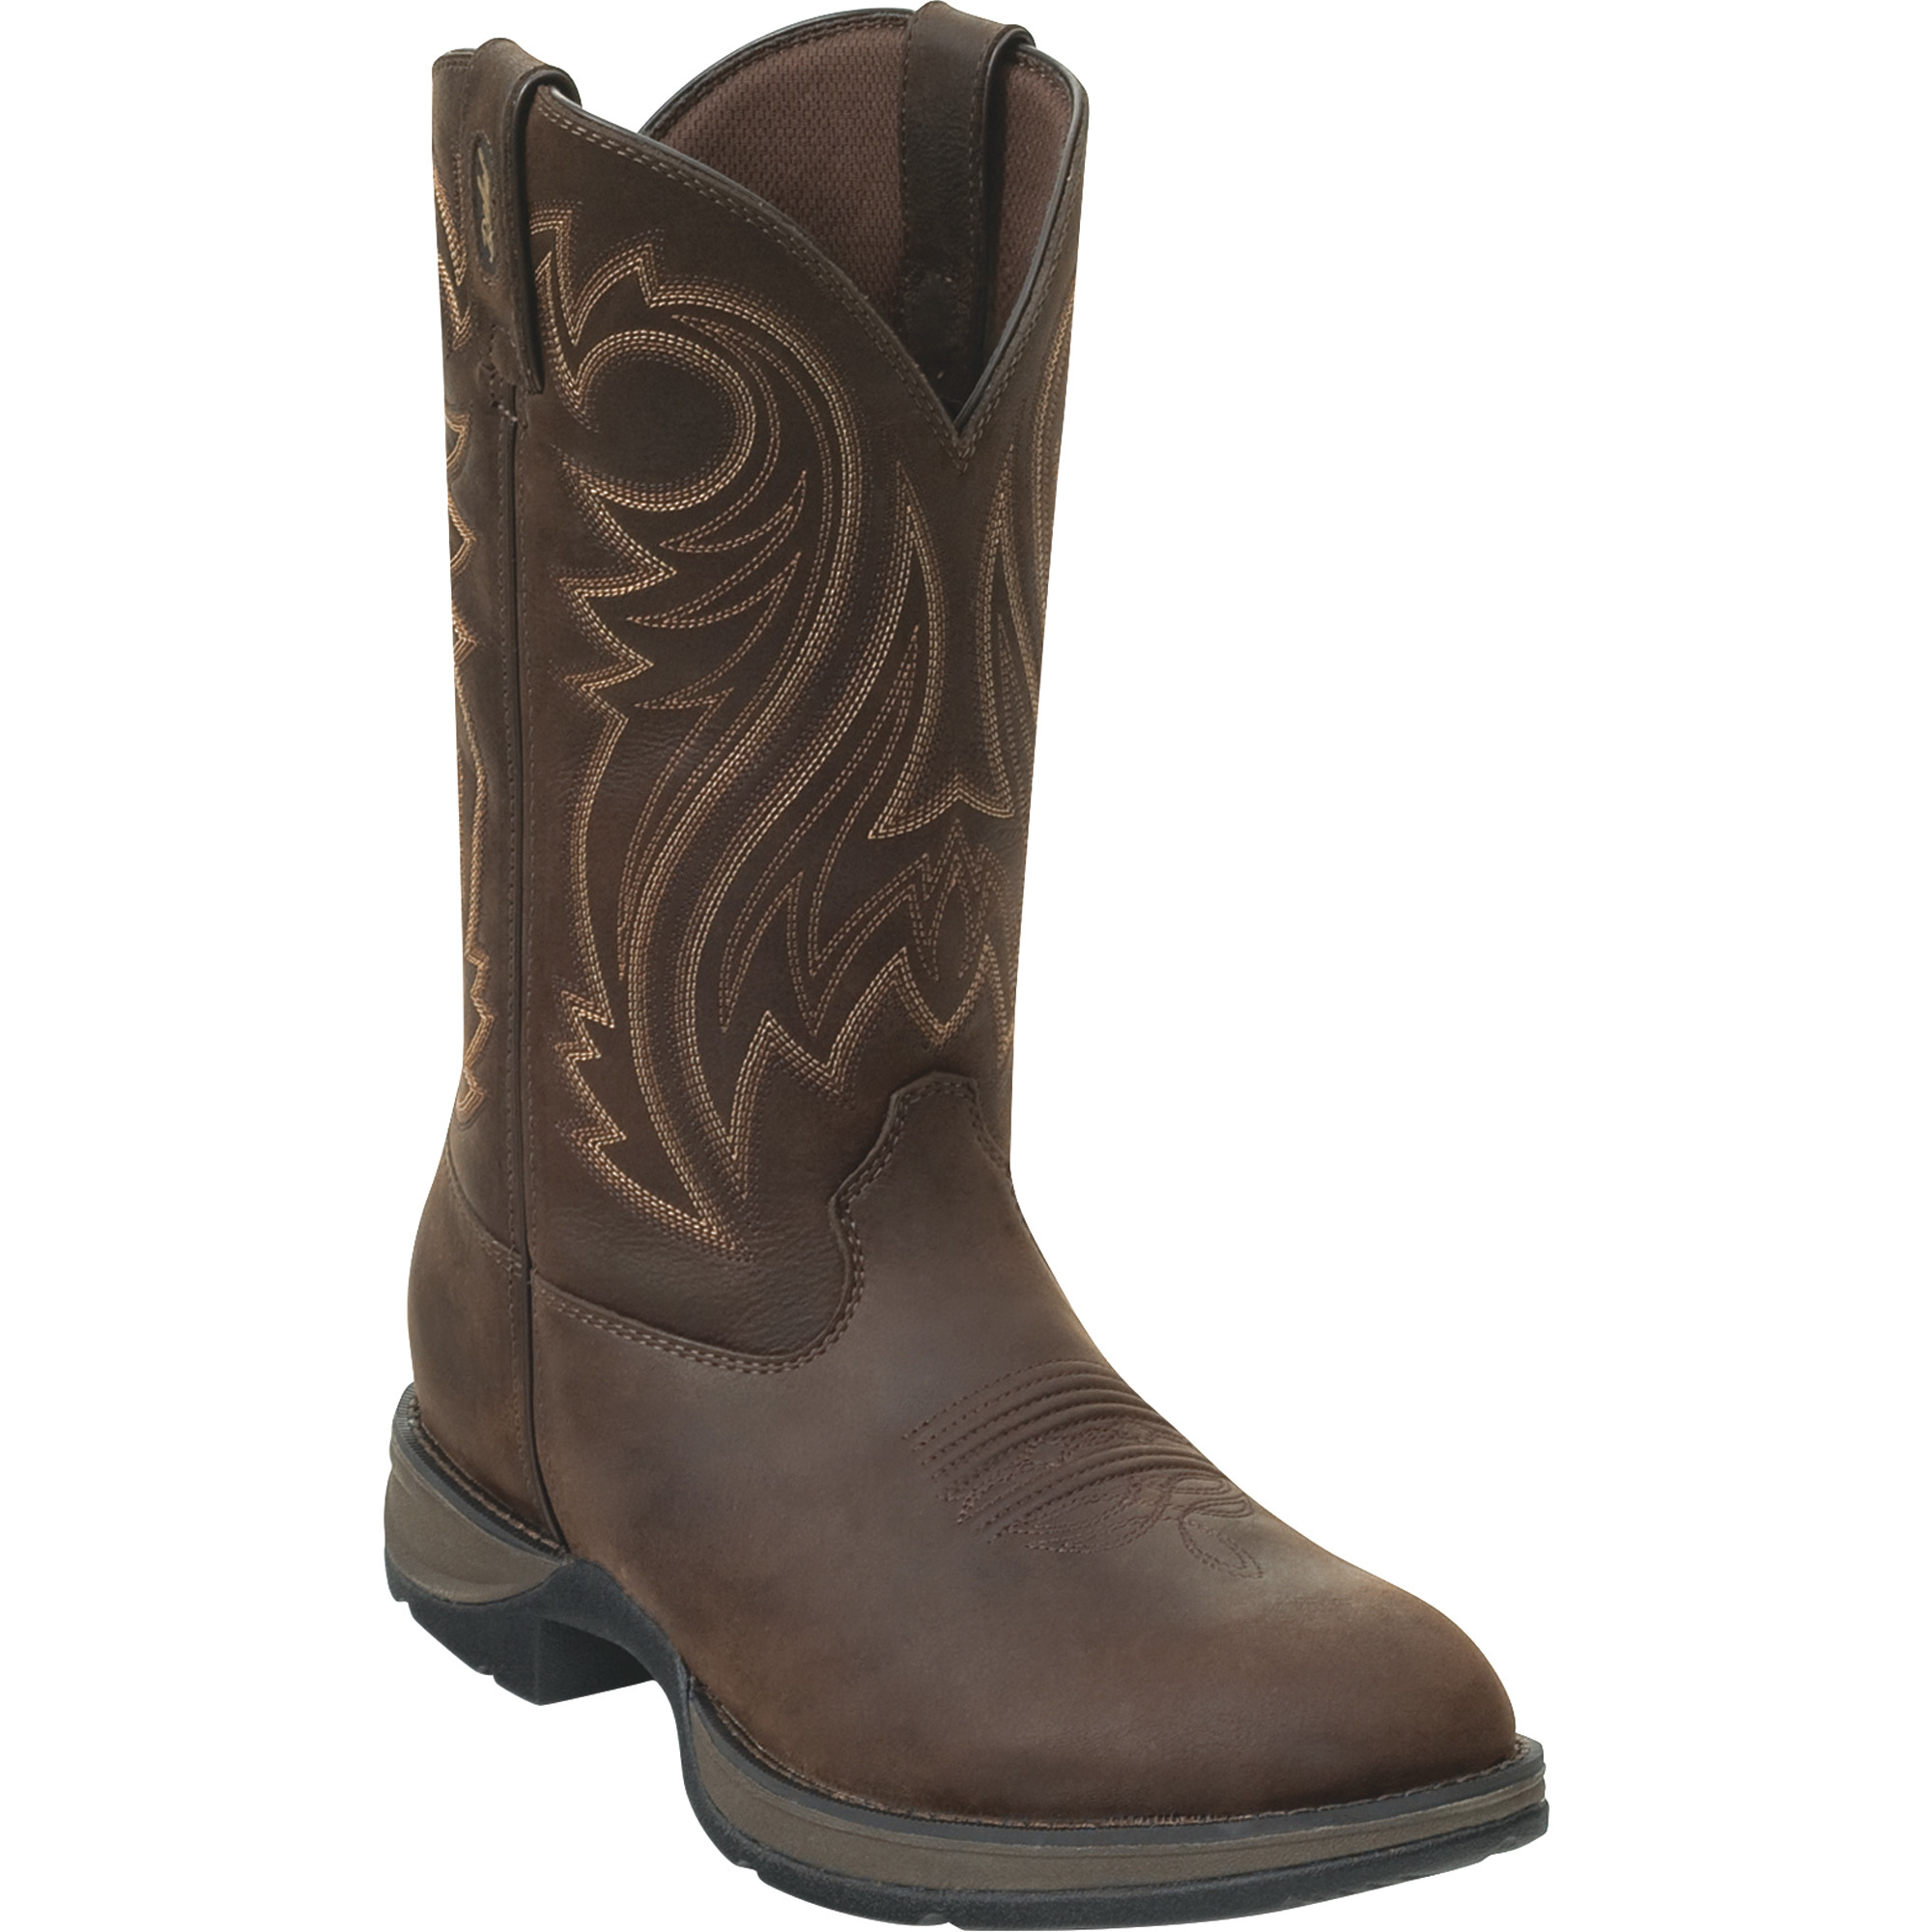 Durango Men's Rebel 12Inch Pull-On Western Work Boots - Chocolate, Size 8 1/2, Model DB 5464